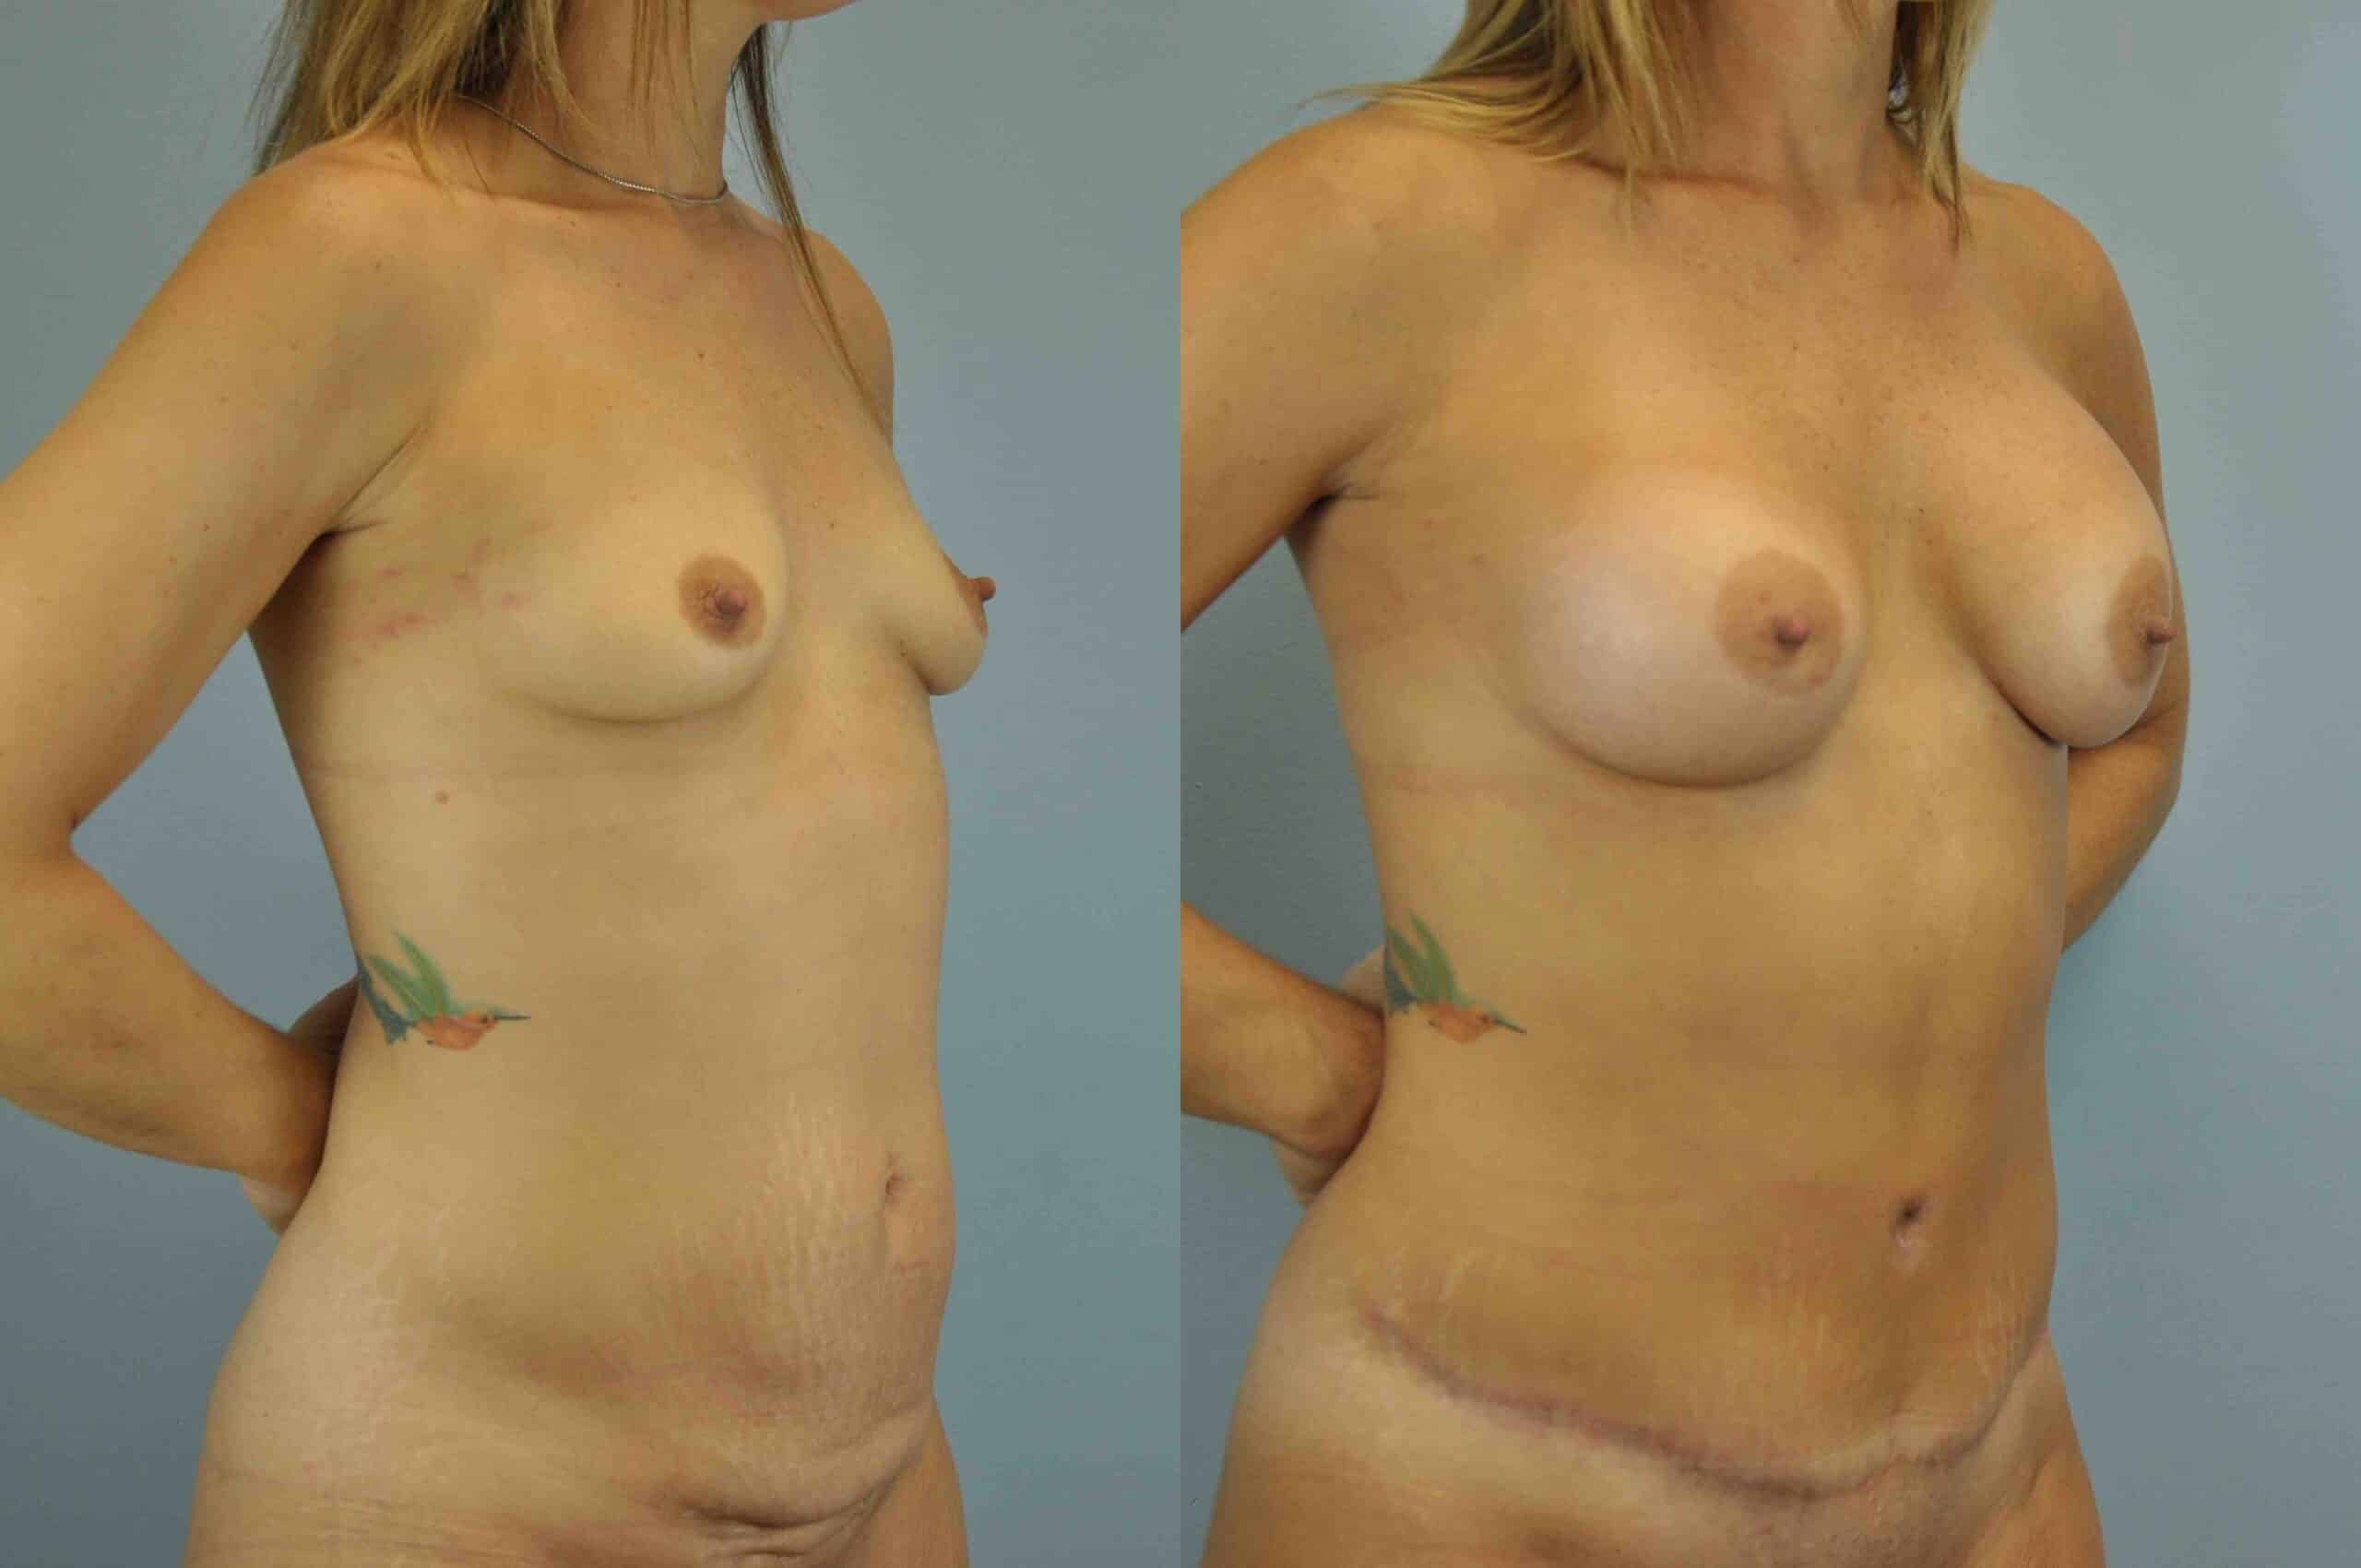 Before and after, patient 2 mo post op from Tummy Tuck and Breast Augmentation procedures performed by Dr. Paul Vanek